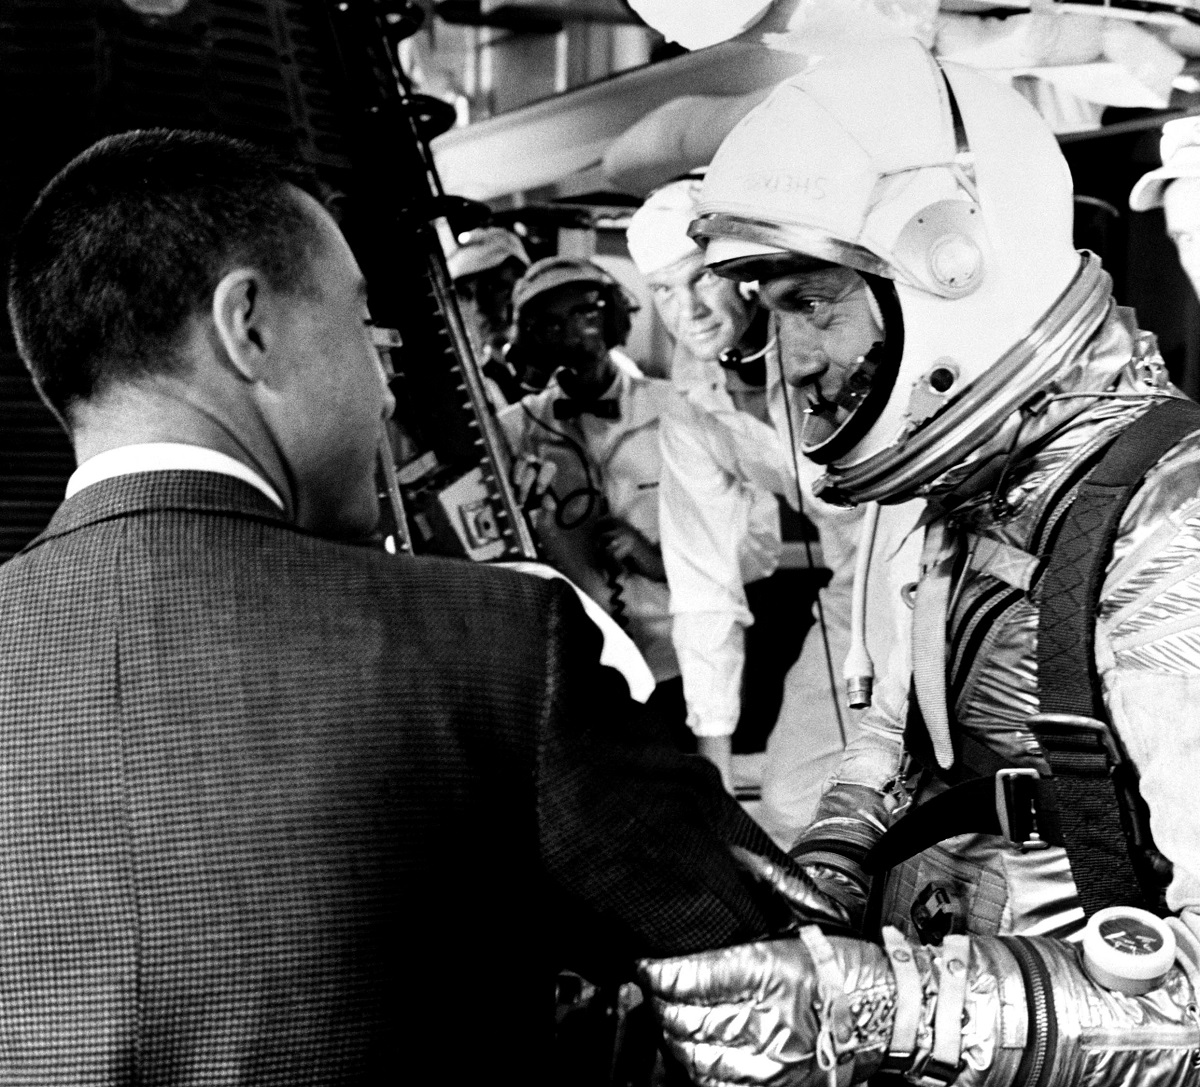 Alan Shepard speaks with Gus Grissom (on left, back to camera), prior to climbing aboard his Freedom 7 capsule for his Mercury-Redstone 3 mission on May 5, 1961. John Glenn (behind Shepard) waits to help strap Shepard into the spacecraft. Image Credit: NASA.